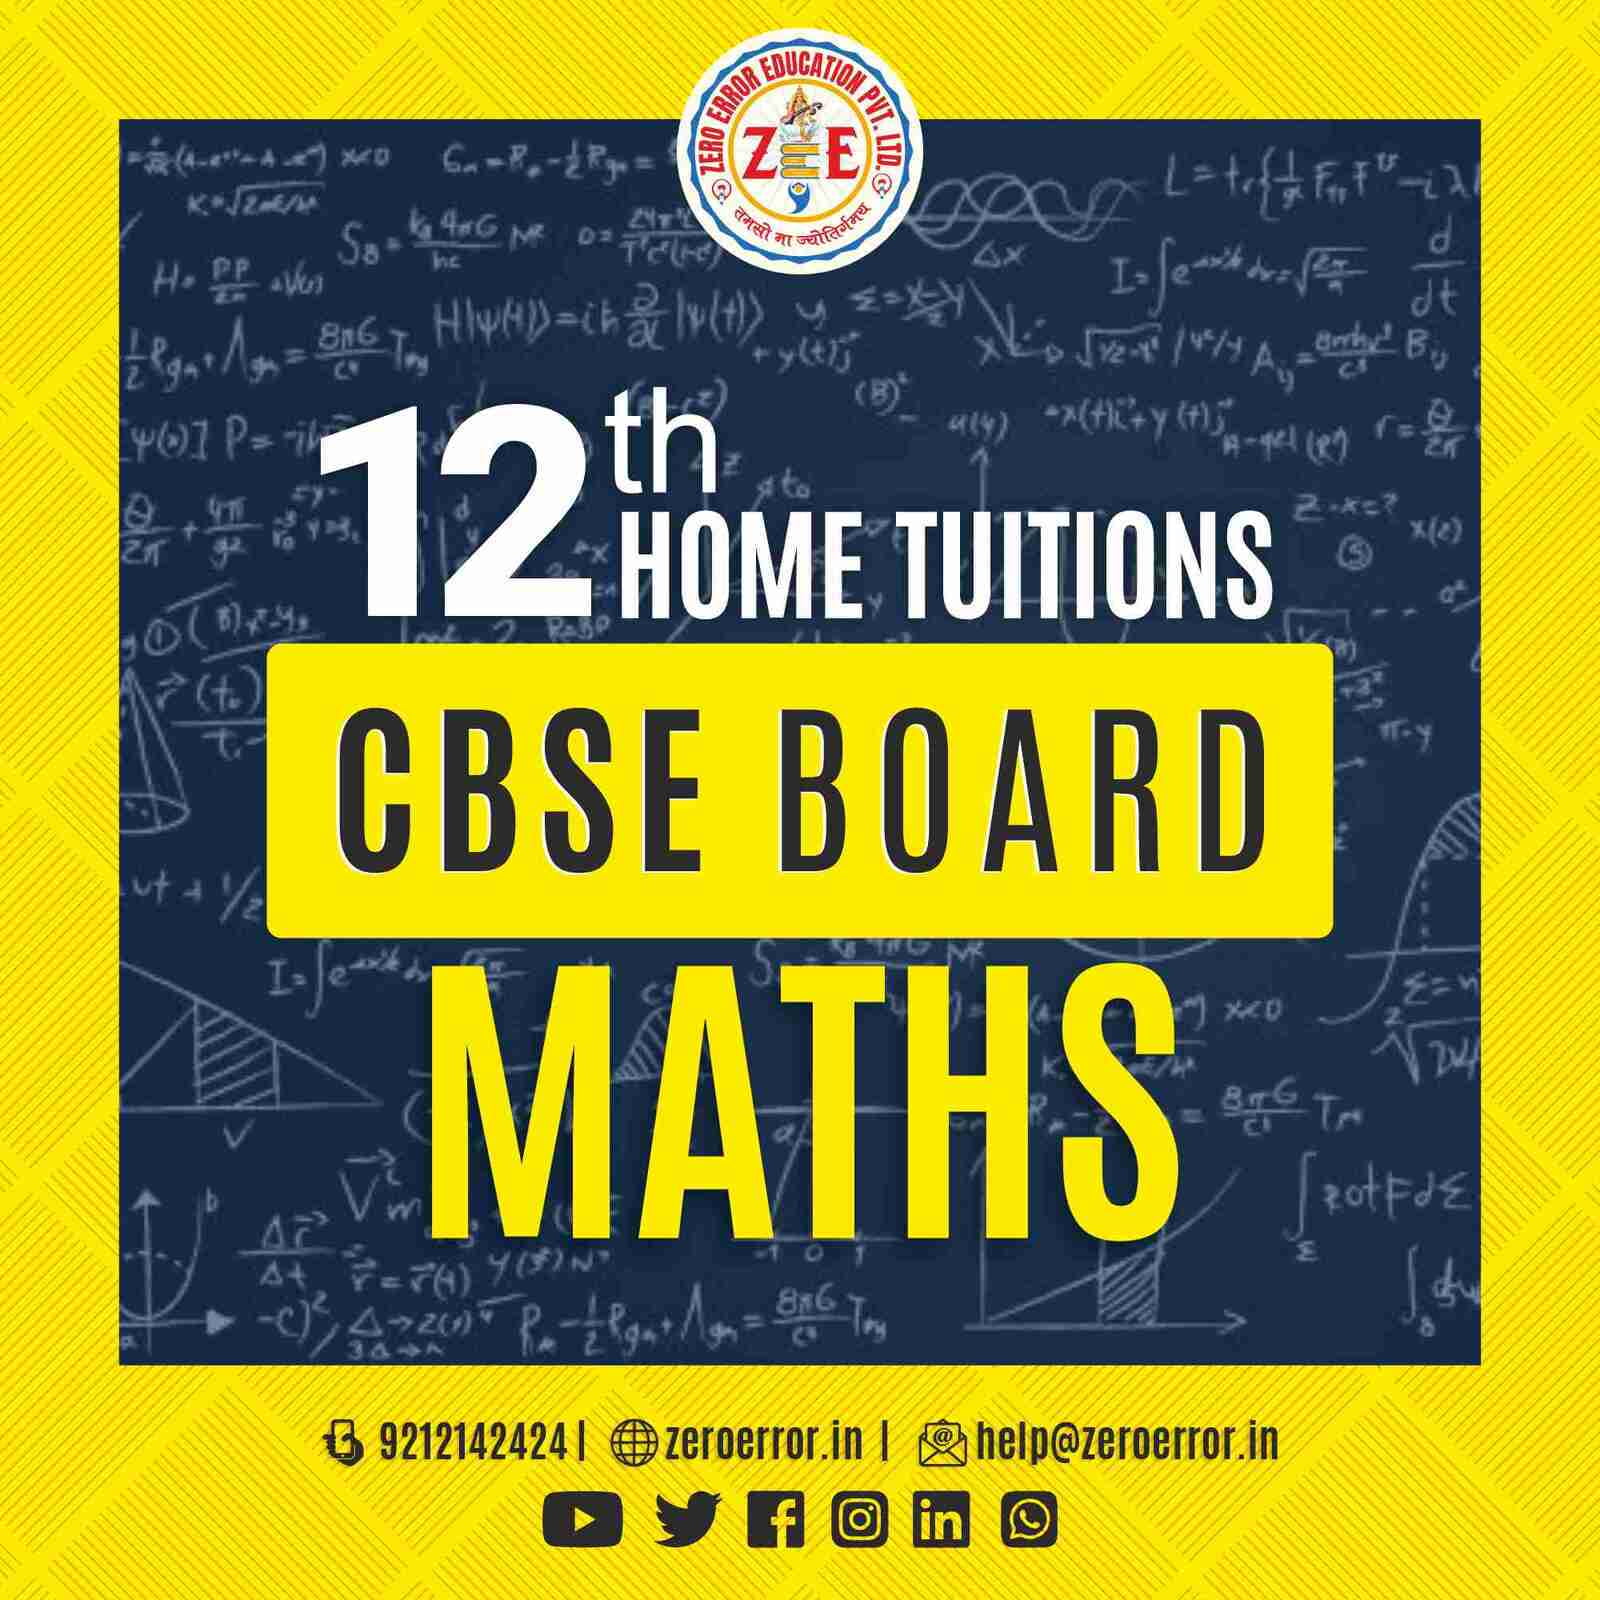 12th Grade CBSE Math's Online Classes by Zero Error Education Prepare for your CBSE board exams with online and offline Math's classes for 12th grade. Learn from experienced home tutors and get all the help you need to succeed. Enroll today at Zero Error Education. [https://zeroerror.in/] Call 9212142424 for more information.